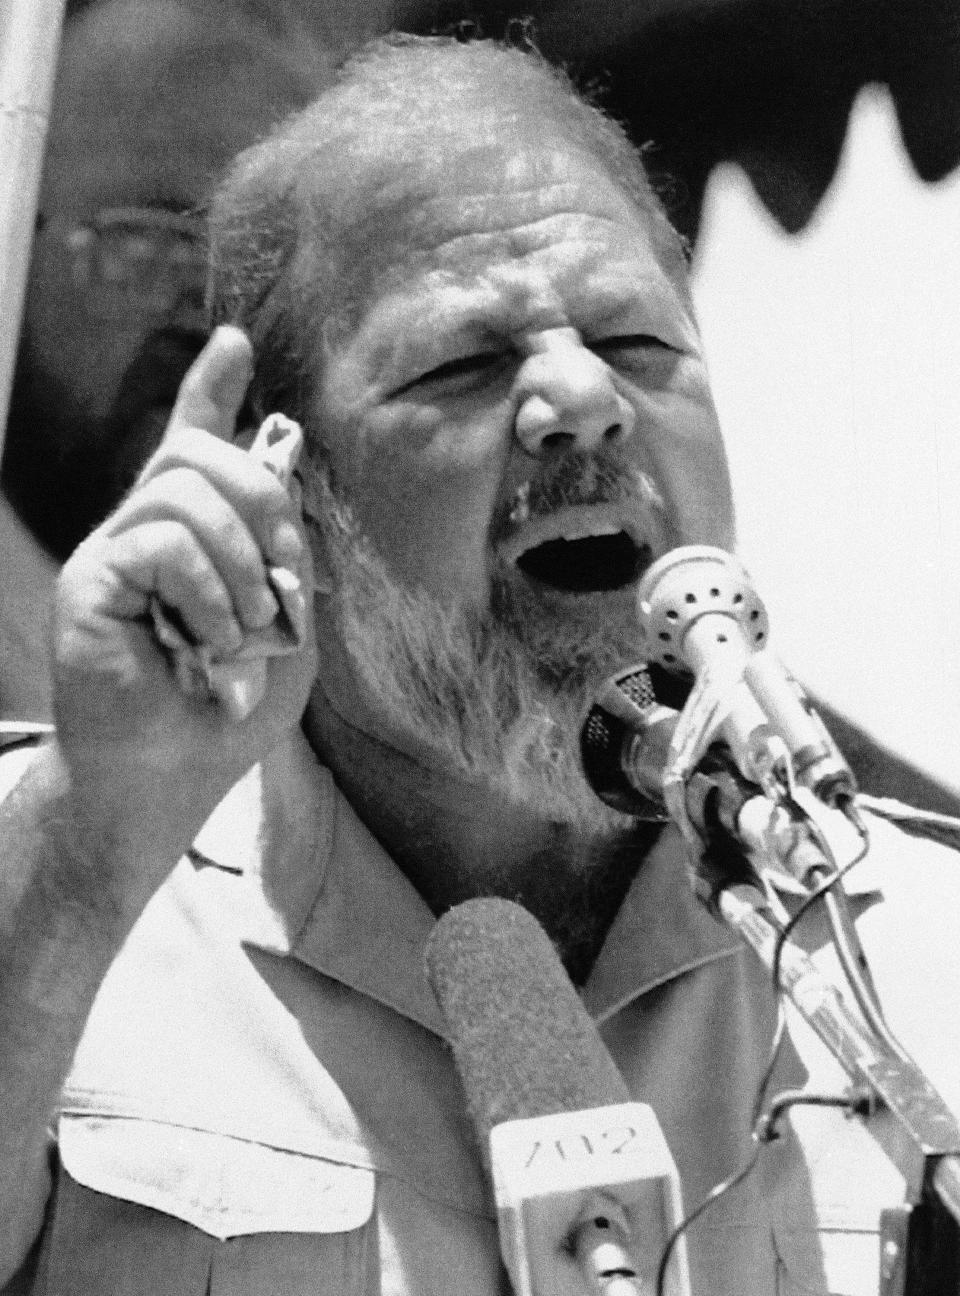 FILE — In this April 6, 1991 file photo taken by South African photographer John Parkin, Eugene Terreblanche, leader of the Afrikaner Resistance Movement gestures while addressing a far right wing political rally in Pretoria, South Africa. Parkin, who covered the country's anti-apartheid struggle, its first democratic elections, and the presidency of Nelson Mandela, has died Monday Aug. 23, 2021, at the age of 63 according to his daughter. (AP Photo/John Parkin/File)